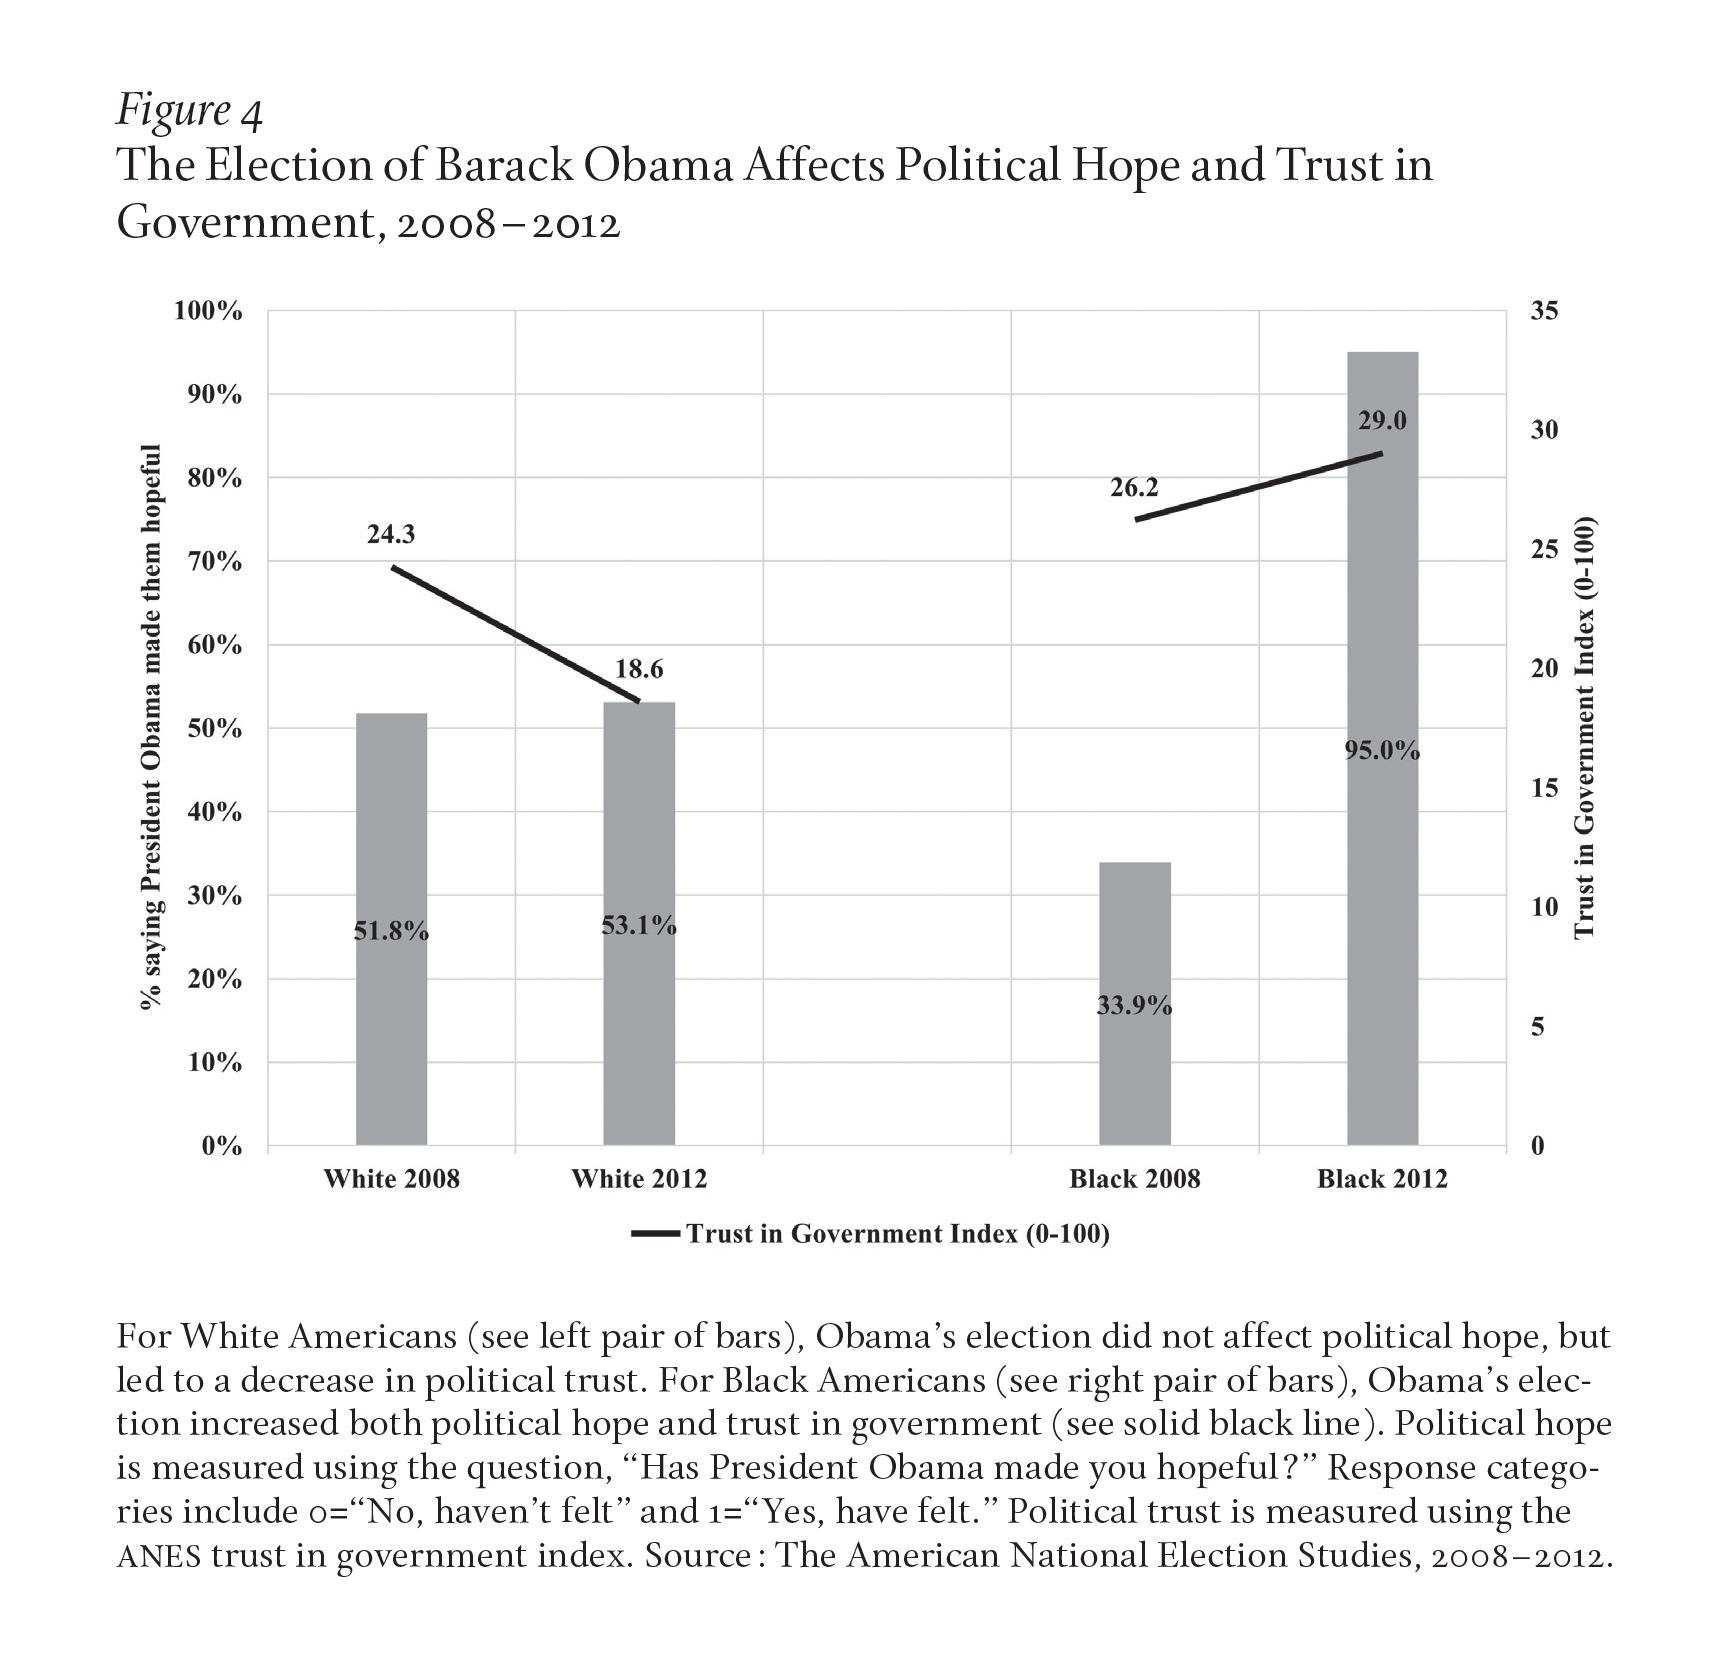 For White Americans, Obama’s election did not affect political hope, but led to a decrease in political trust. For Black Americans, Obama’s election increased both political hope and trust in government. Political hope is measured using the question, “Has President Obama made you hopeful?” Response categories include 0=“No, haven’t felt” and 1=“Yes, have felt.” Political trust is measured using the American National Election Studies trust in government index.